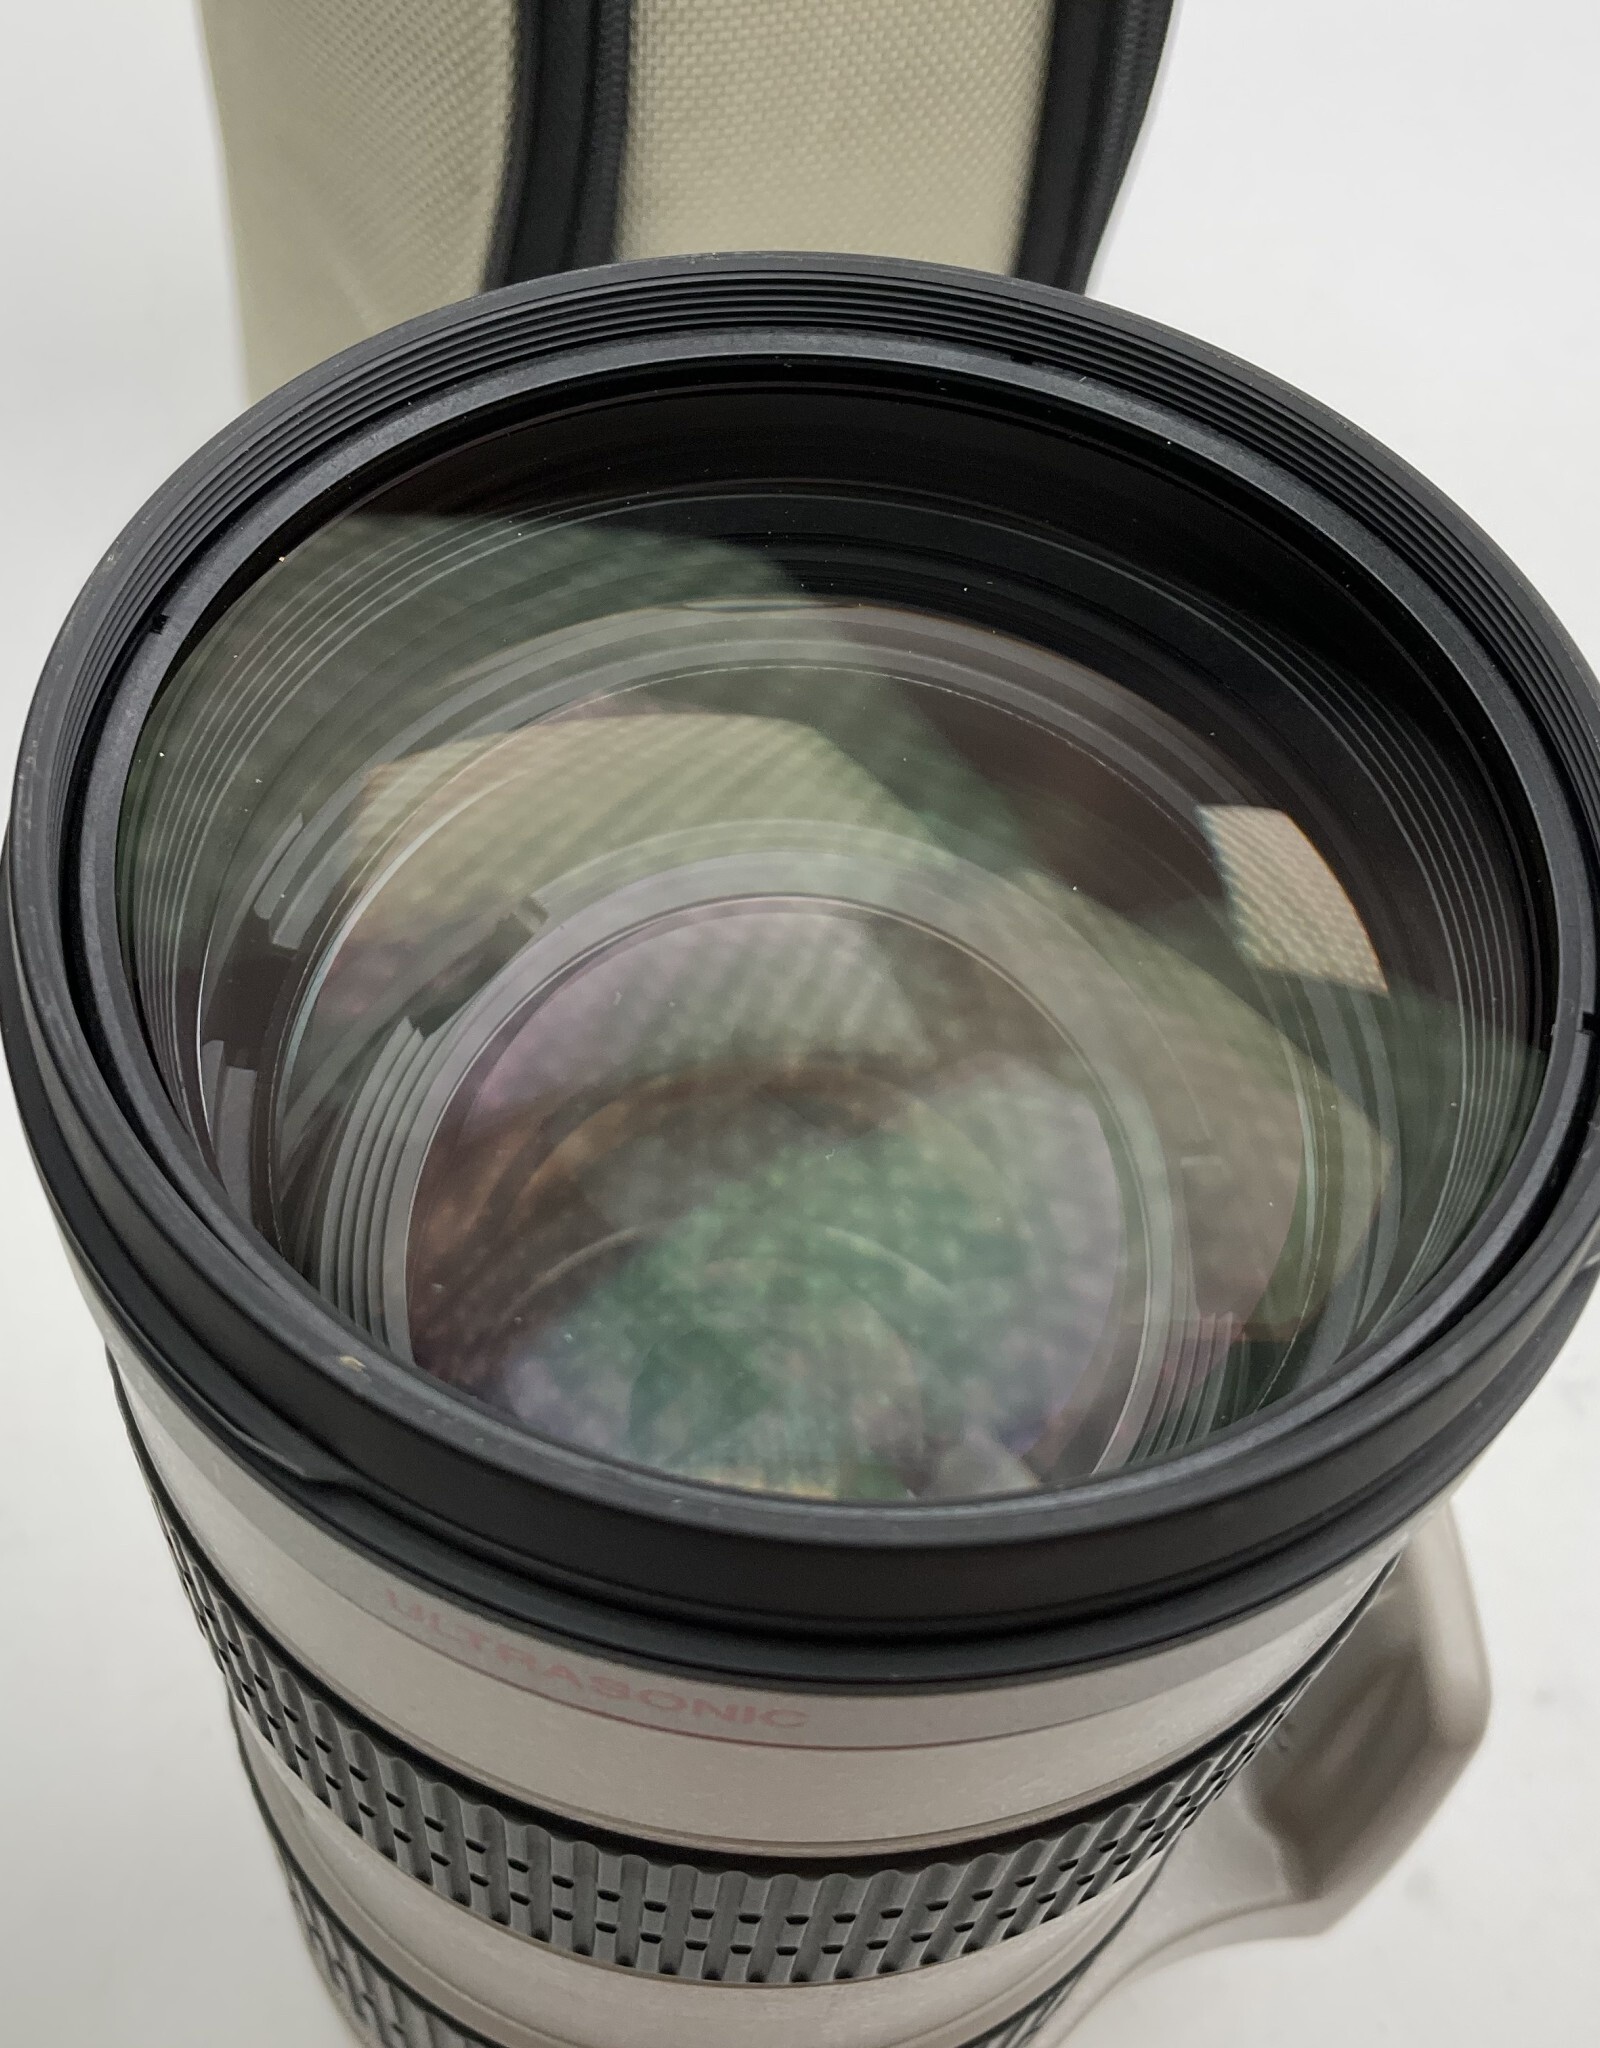 CANON Canon EF 70-200mm f2.8 L Lens Used Good